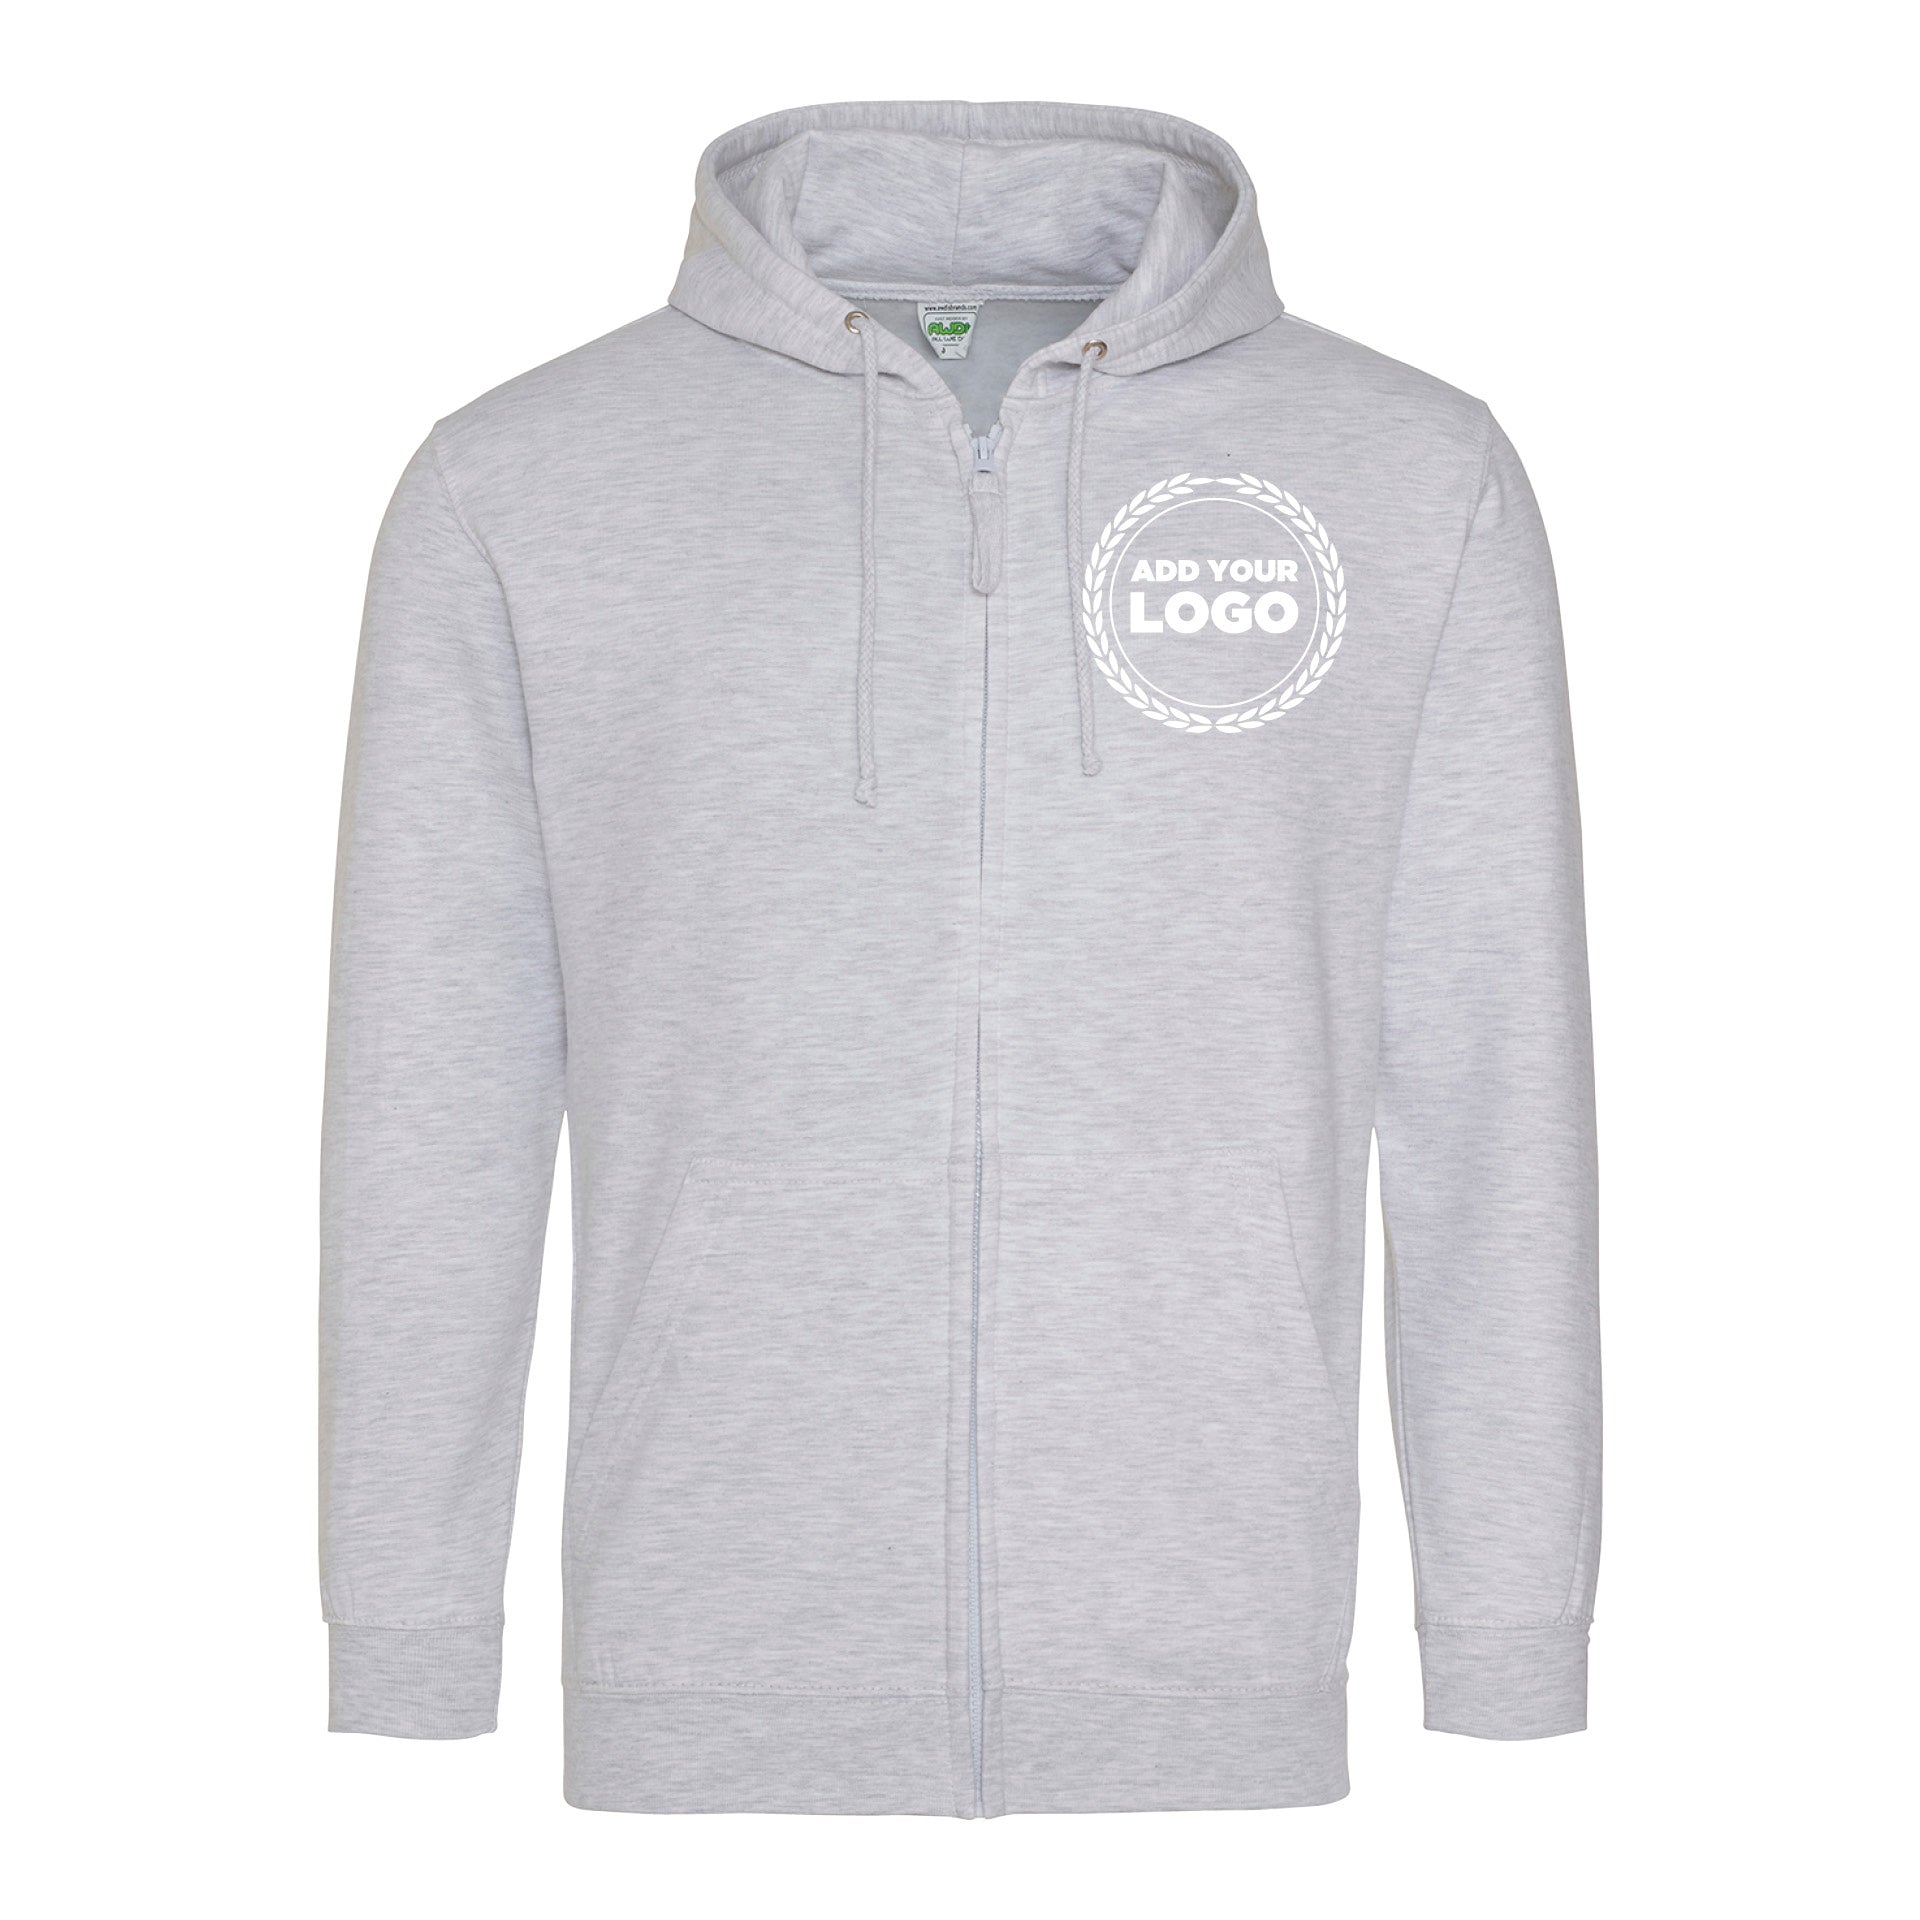 ZIPPED HOODIE - LARGER SIZES